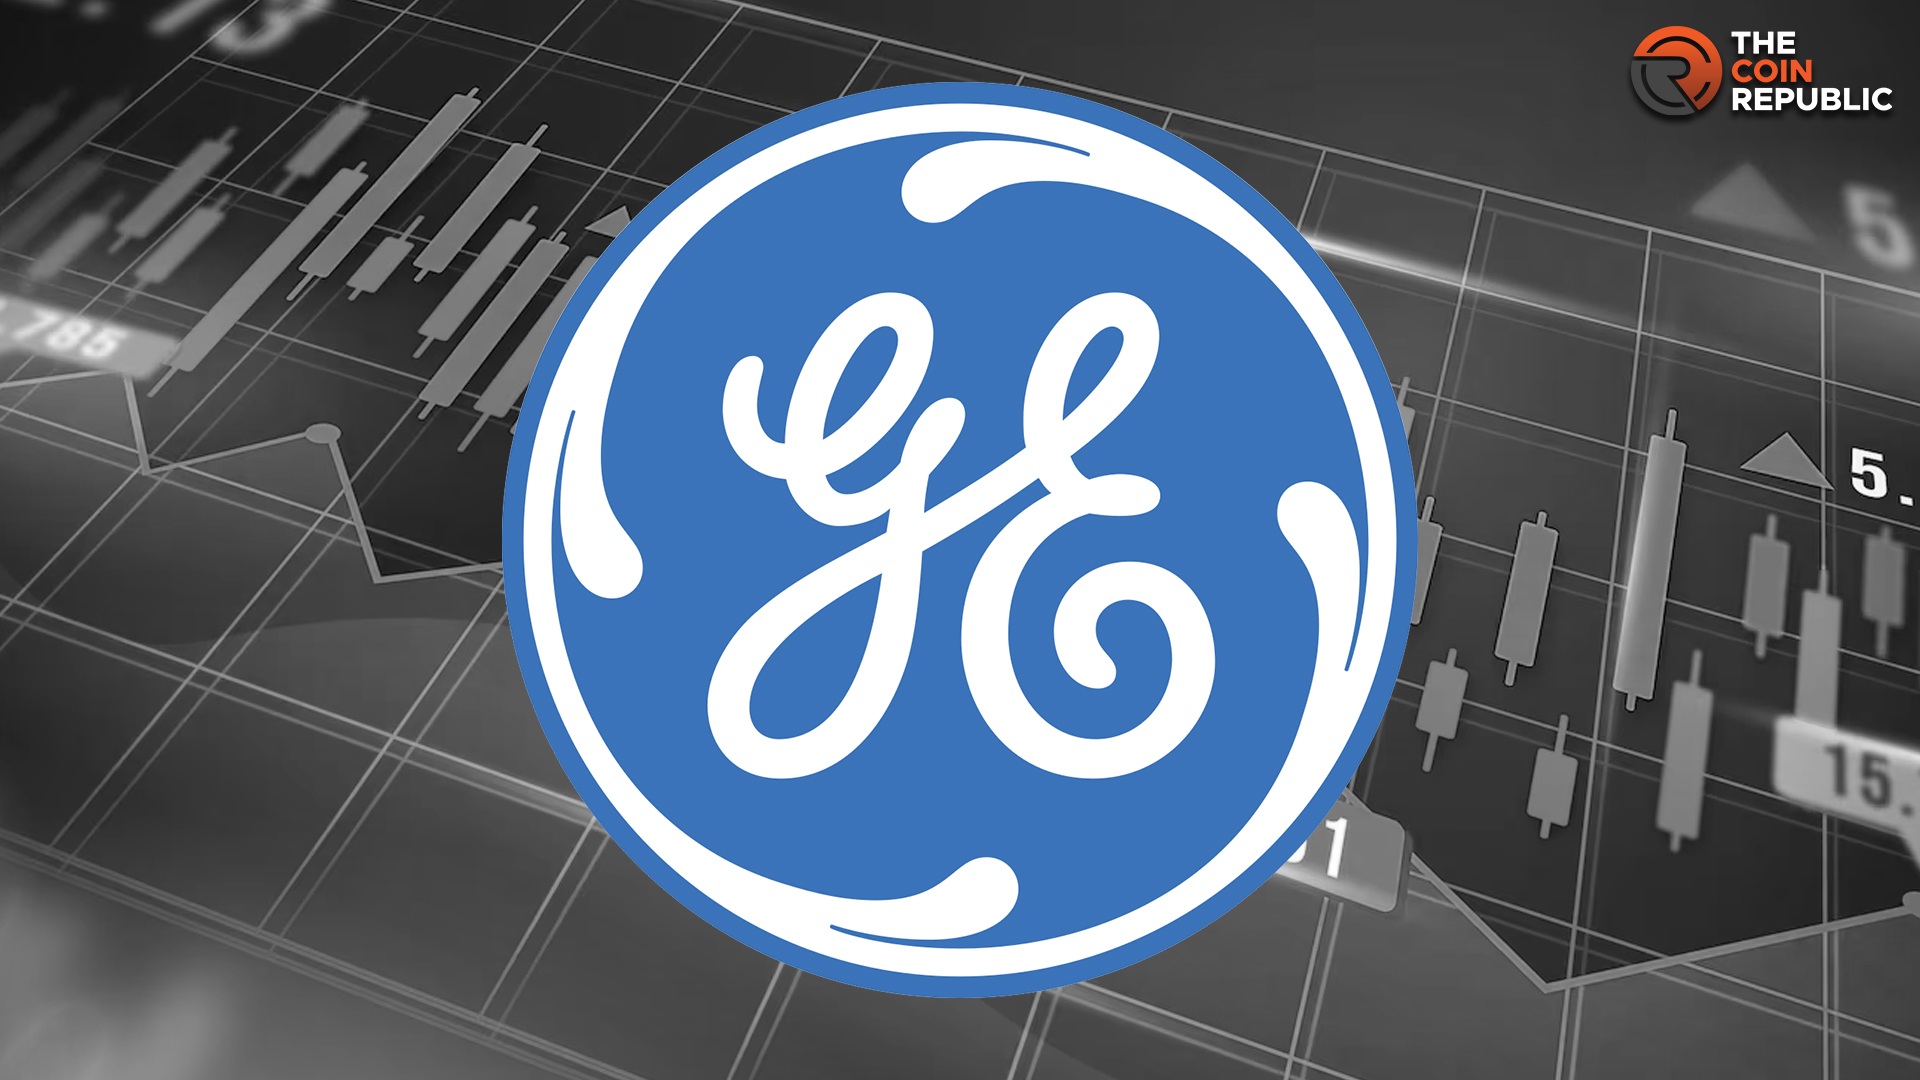 General Electric Co. : Sellers Distress as GE Stock to Break $115